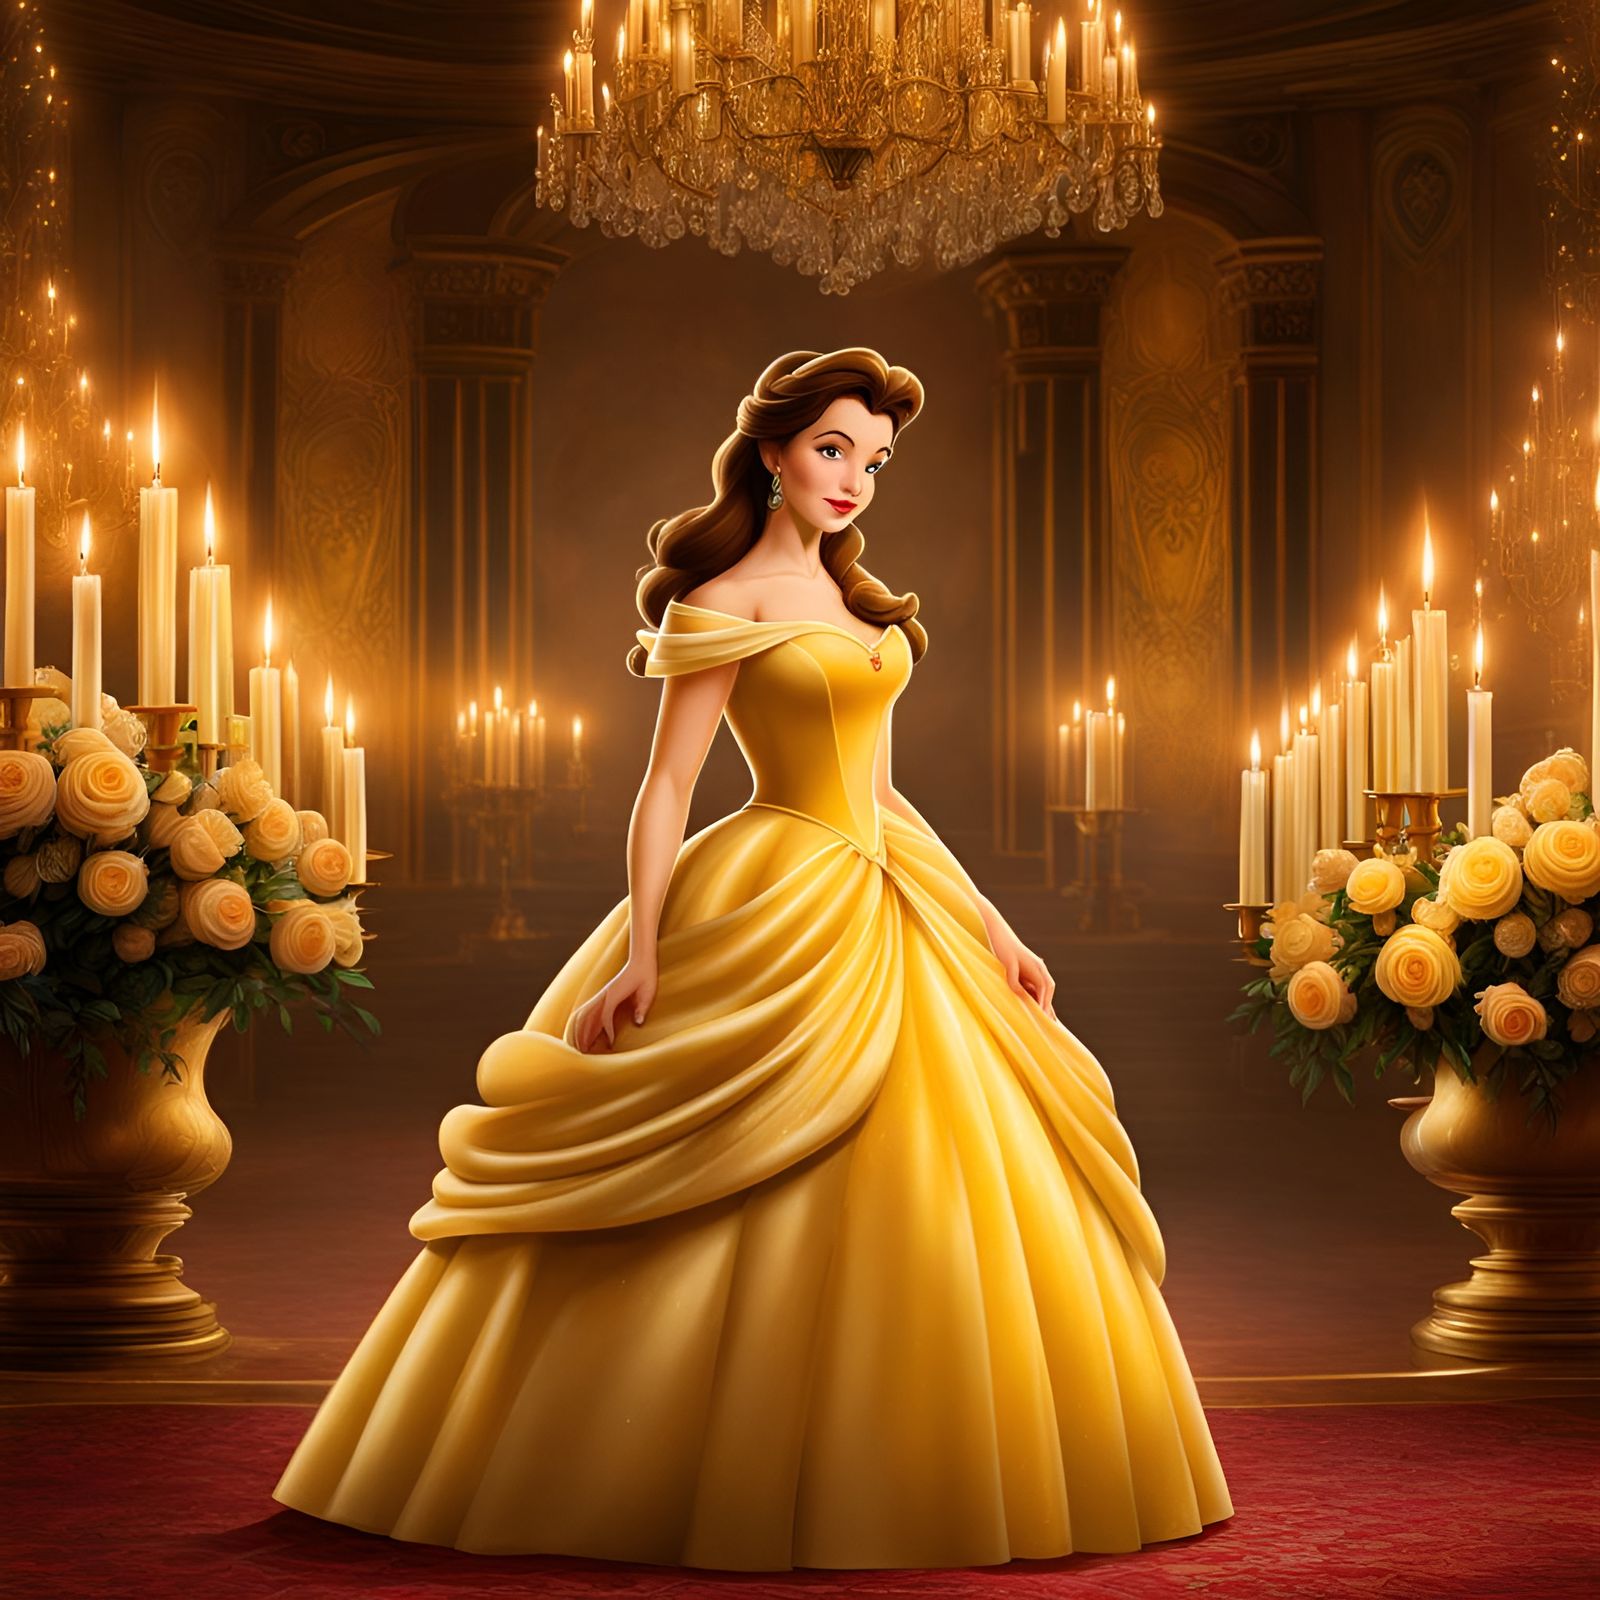 Belle in Disney Princess editorial photography. Image of gold